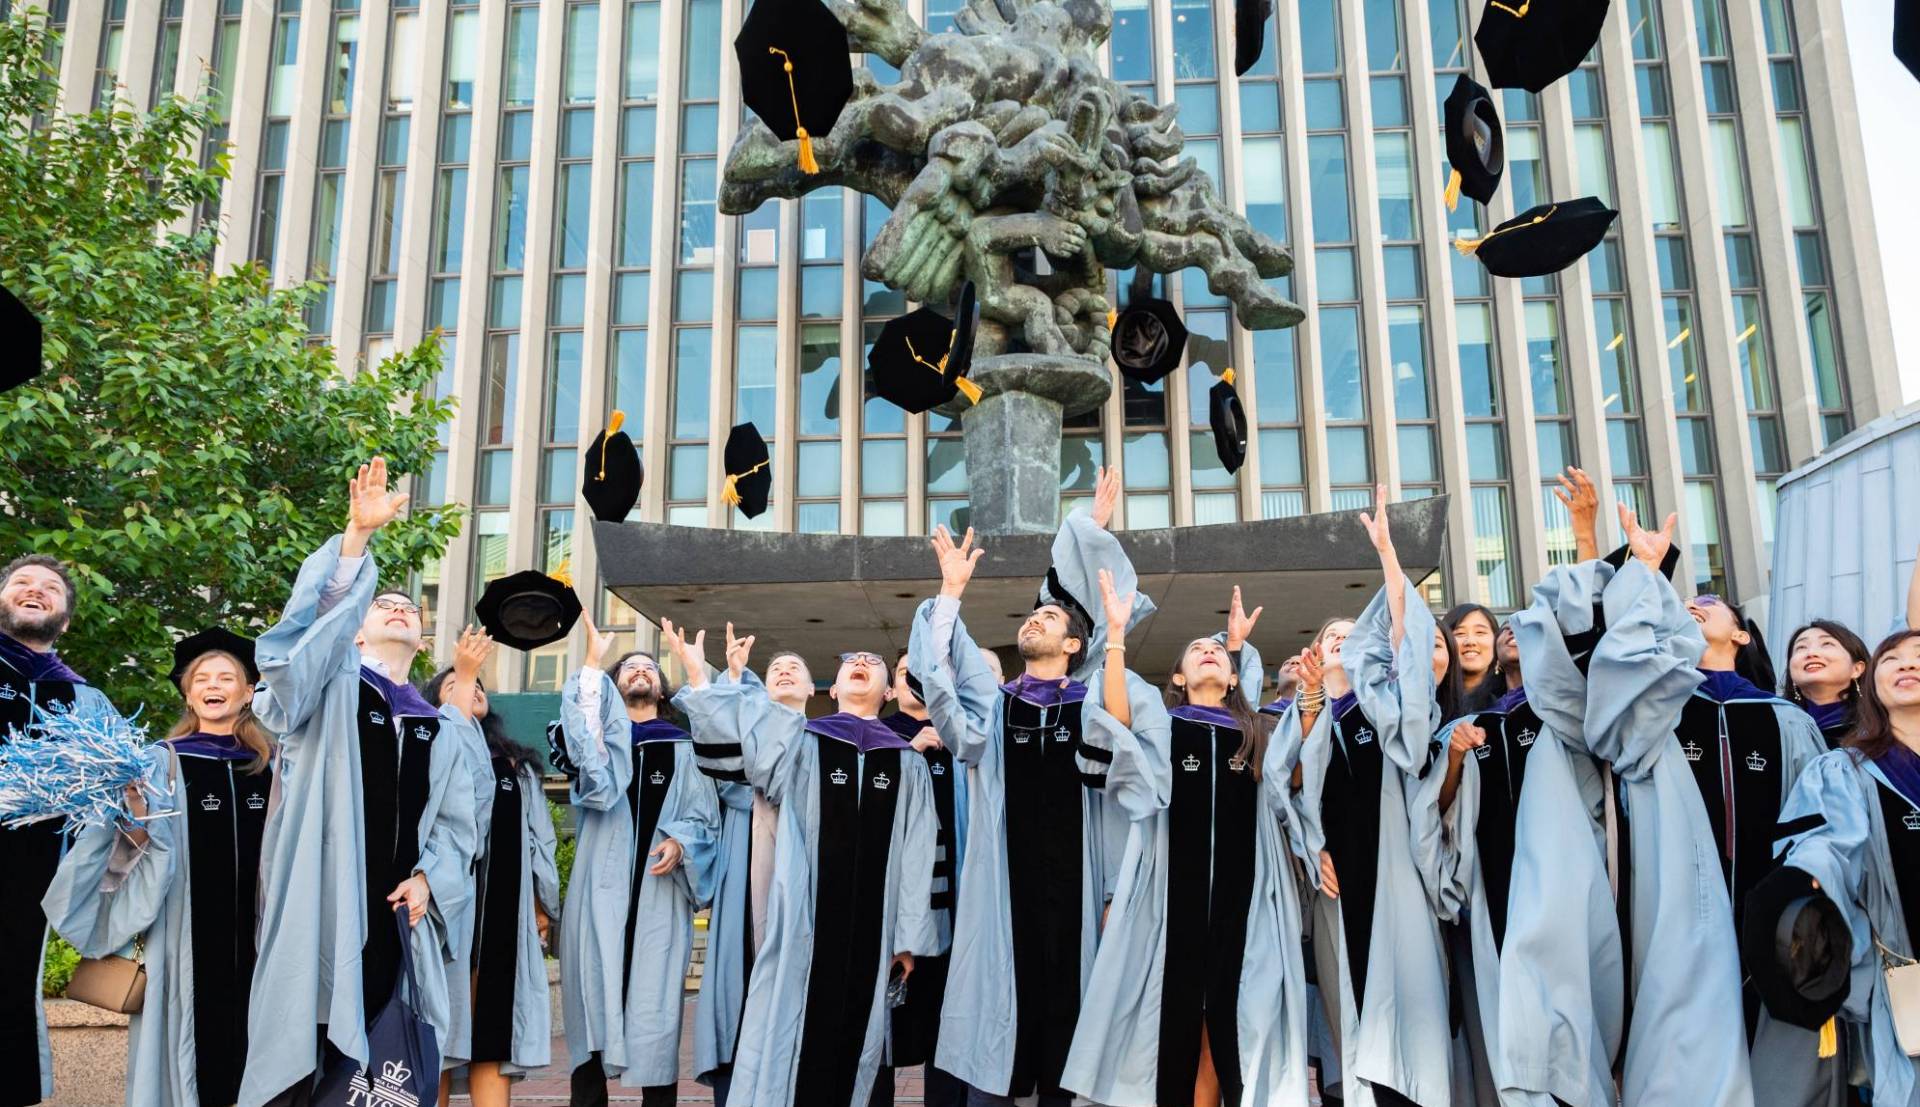 Columbian doctoral graduates throwing their mortarboards in the air in celebration at University Commencement.